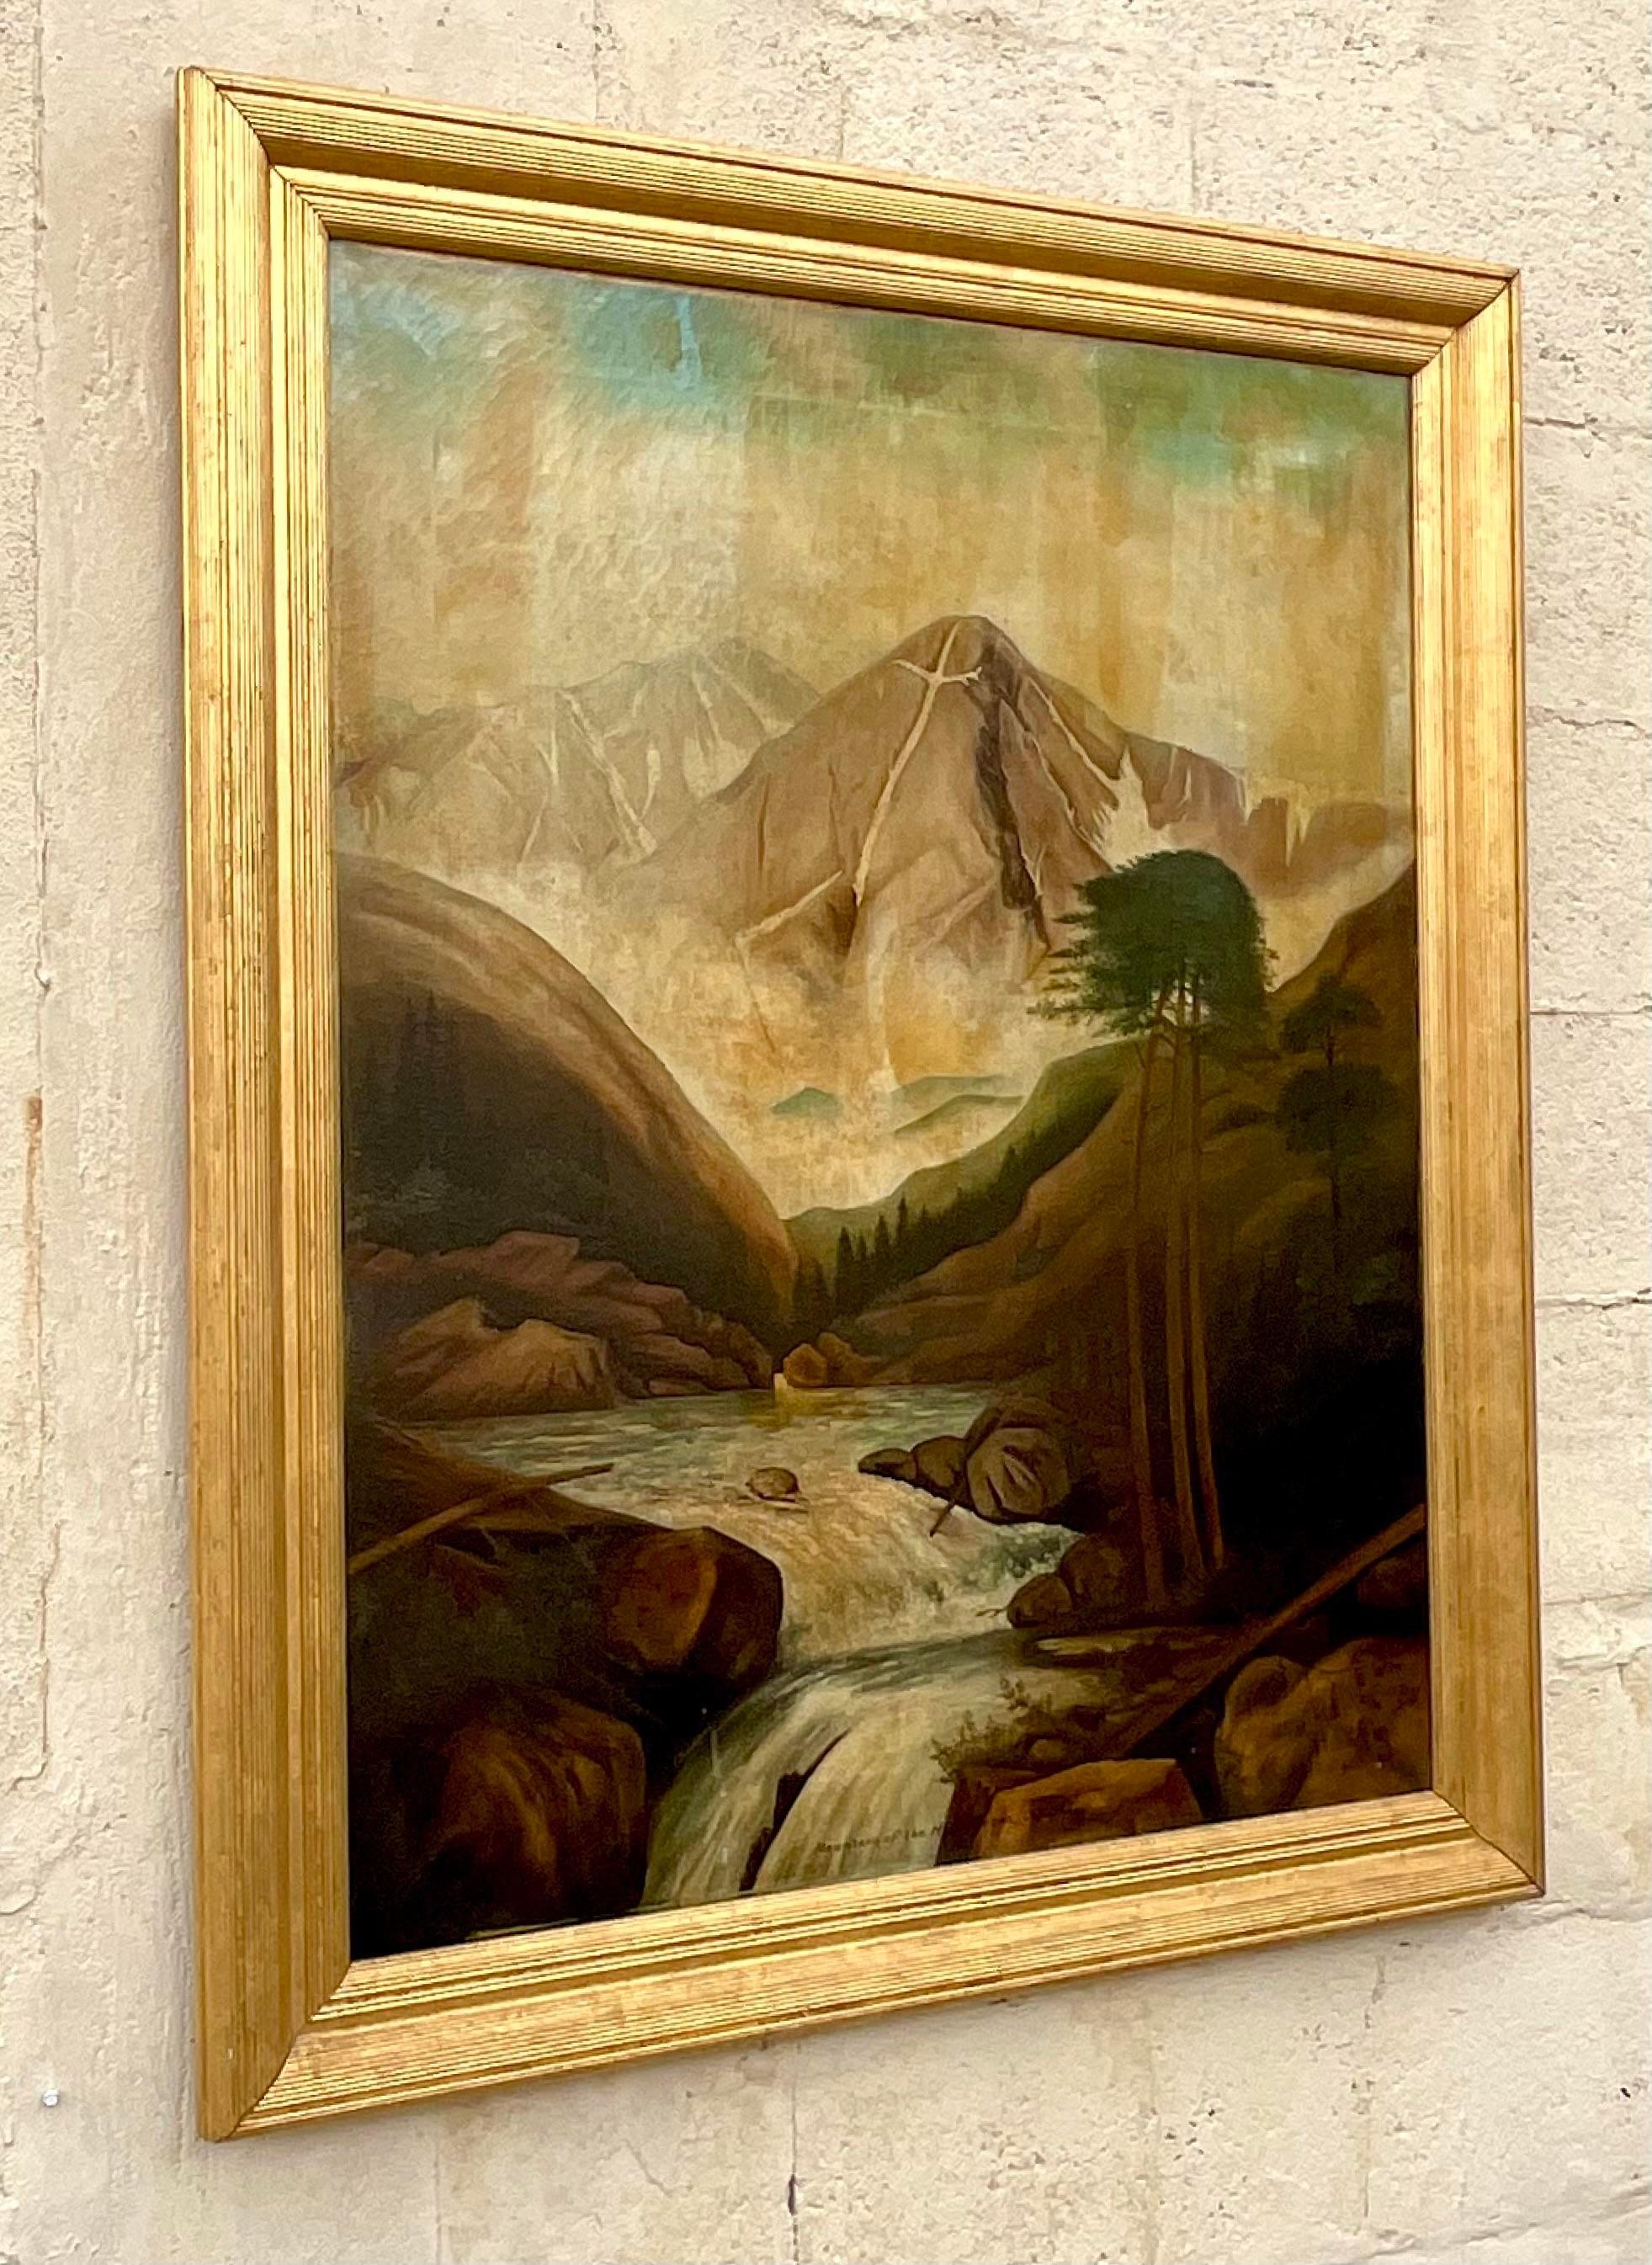 A fantastic vintage original oil painting on canvas framed in a magnificent gilt frame. A chic  American West composition “Colorado Mount of the Holy Cross